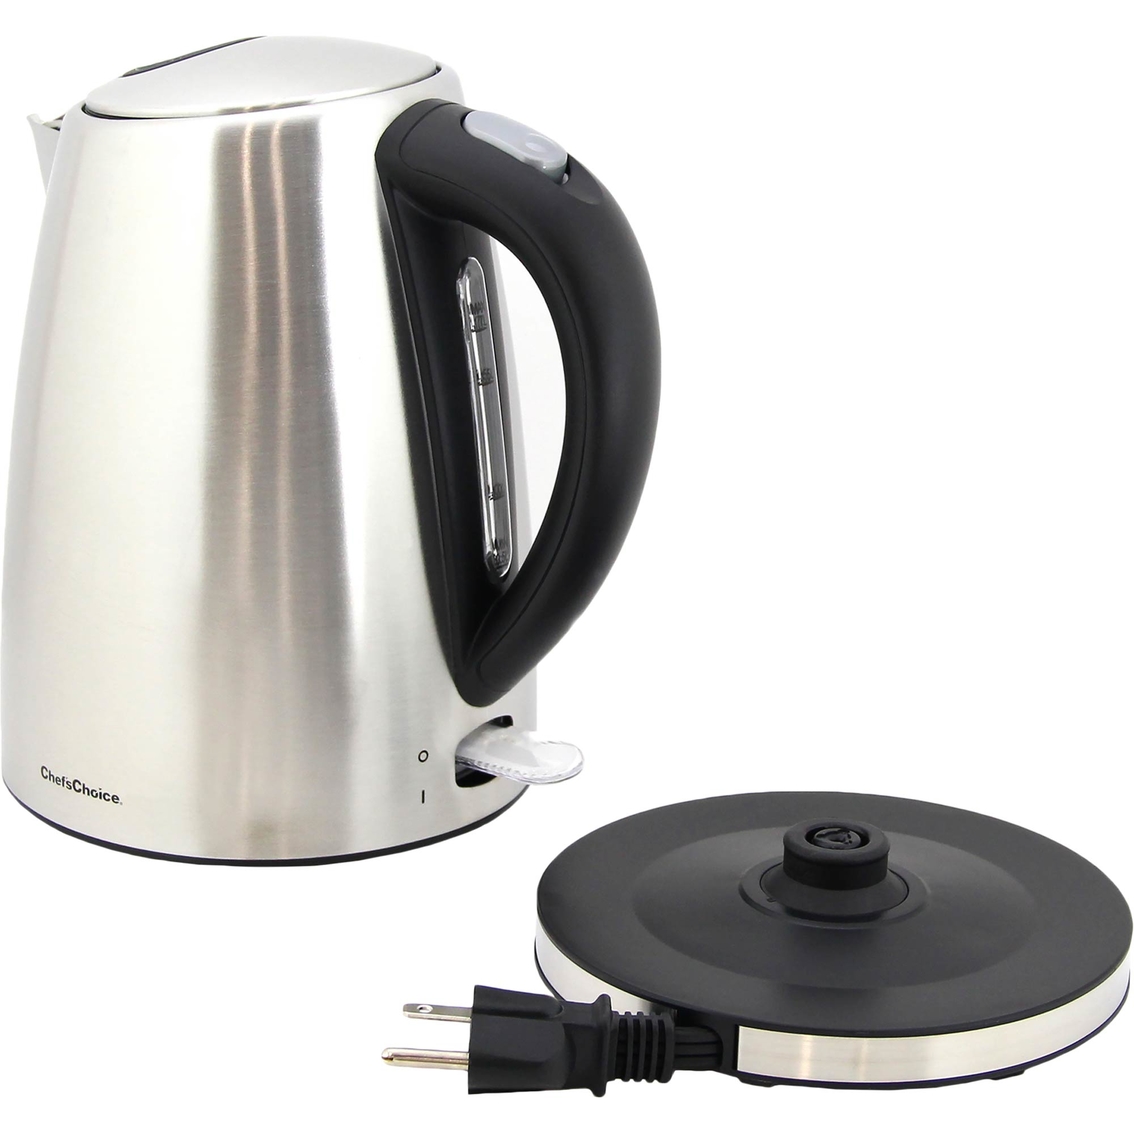 Chef's Choice Cordless Electric Kettle - Image 4 of 4